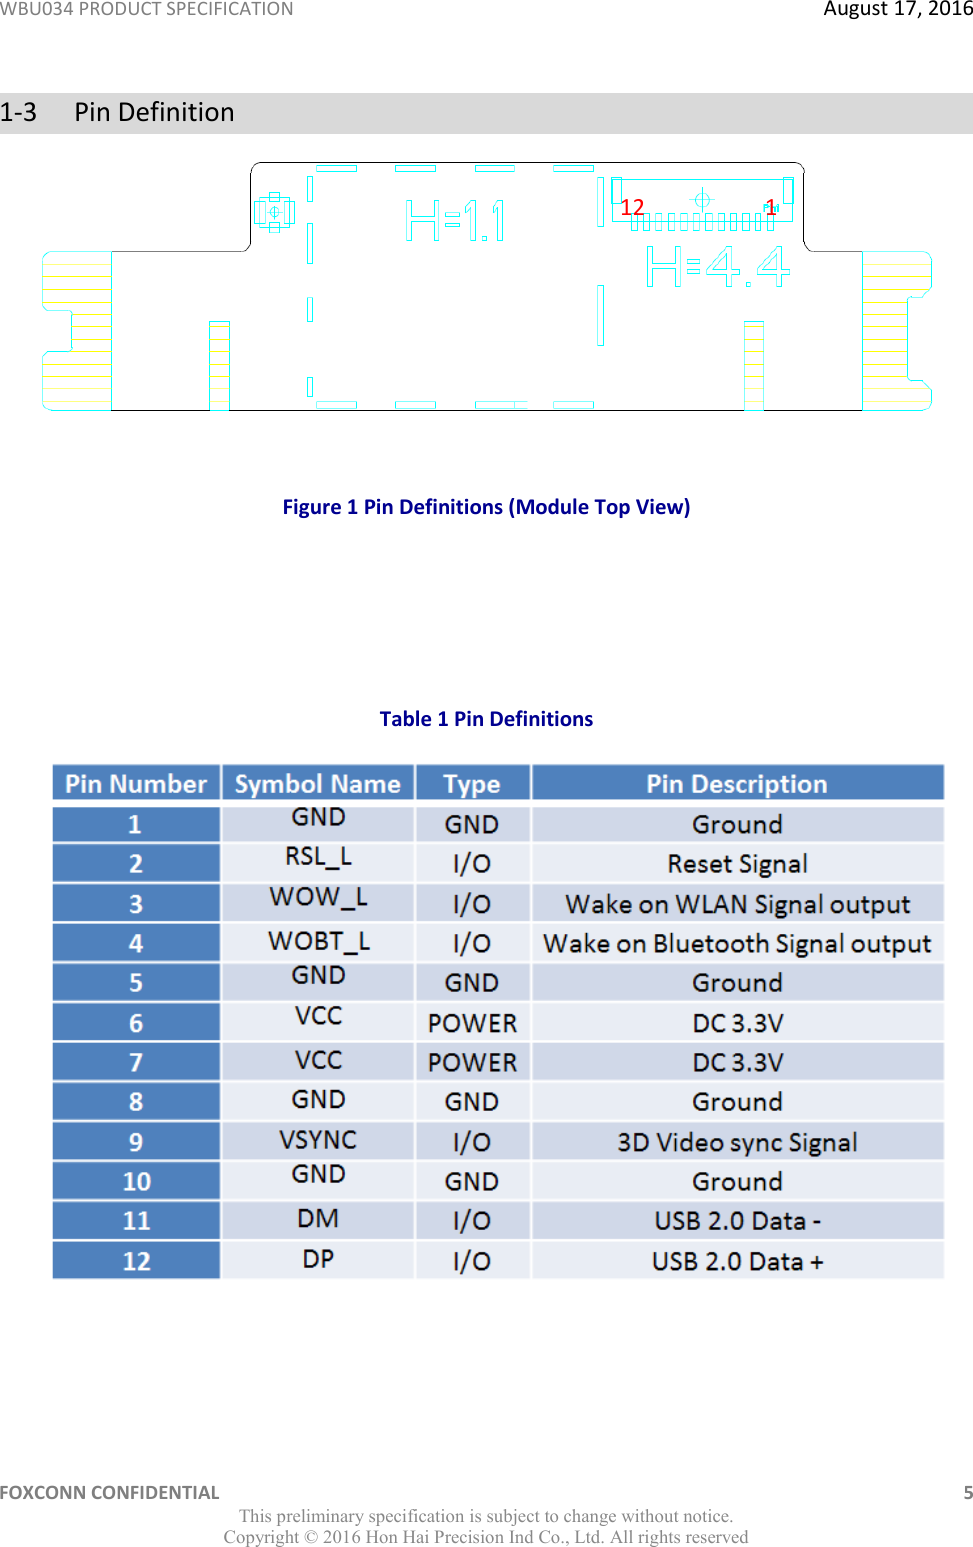 WBU034 PRODUCT SPECIFICATION  August 17, 2016 FOXCONN CONFIDENTIAL    5 This preliminary specification is subject to change without notice. Copyright ©  2016 Hon Hai Precision Ind Co., Ltd. All rights reserved 1-3 Pin Definition   Figure 1 Pin Definitions (Module Top View)    Table 1 Pin Definitions   1 12 